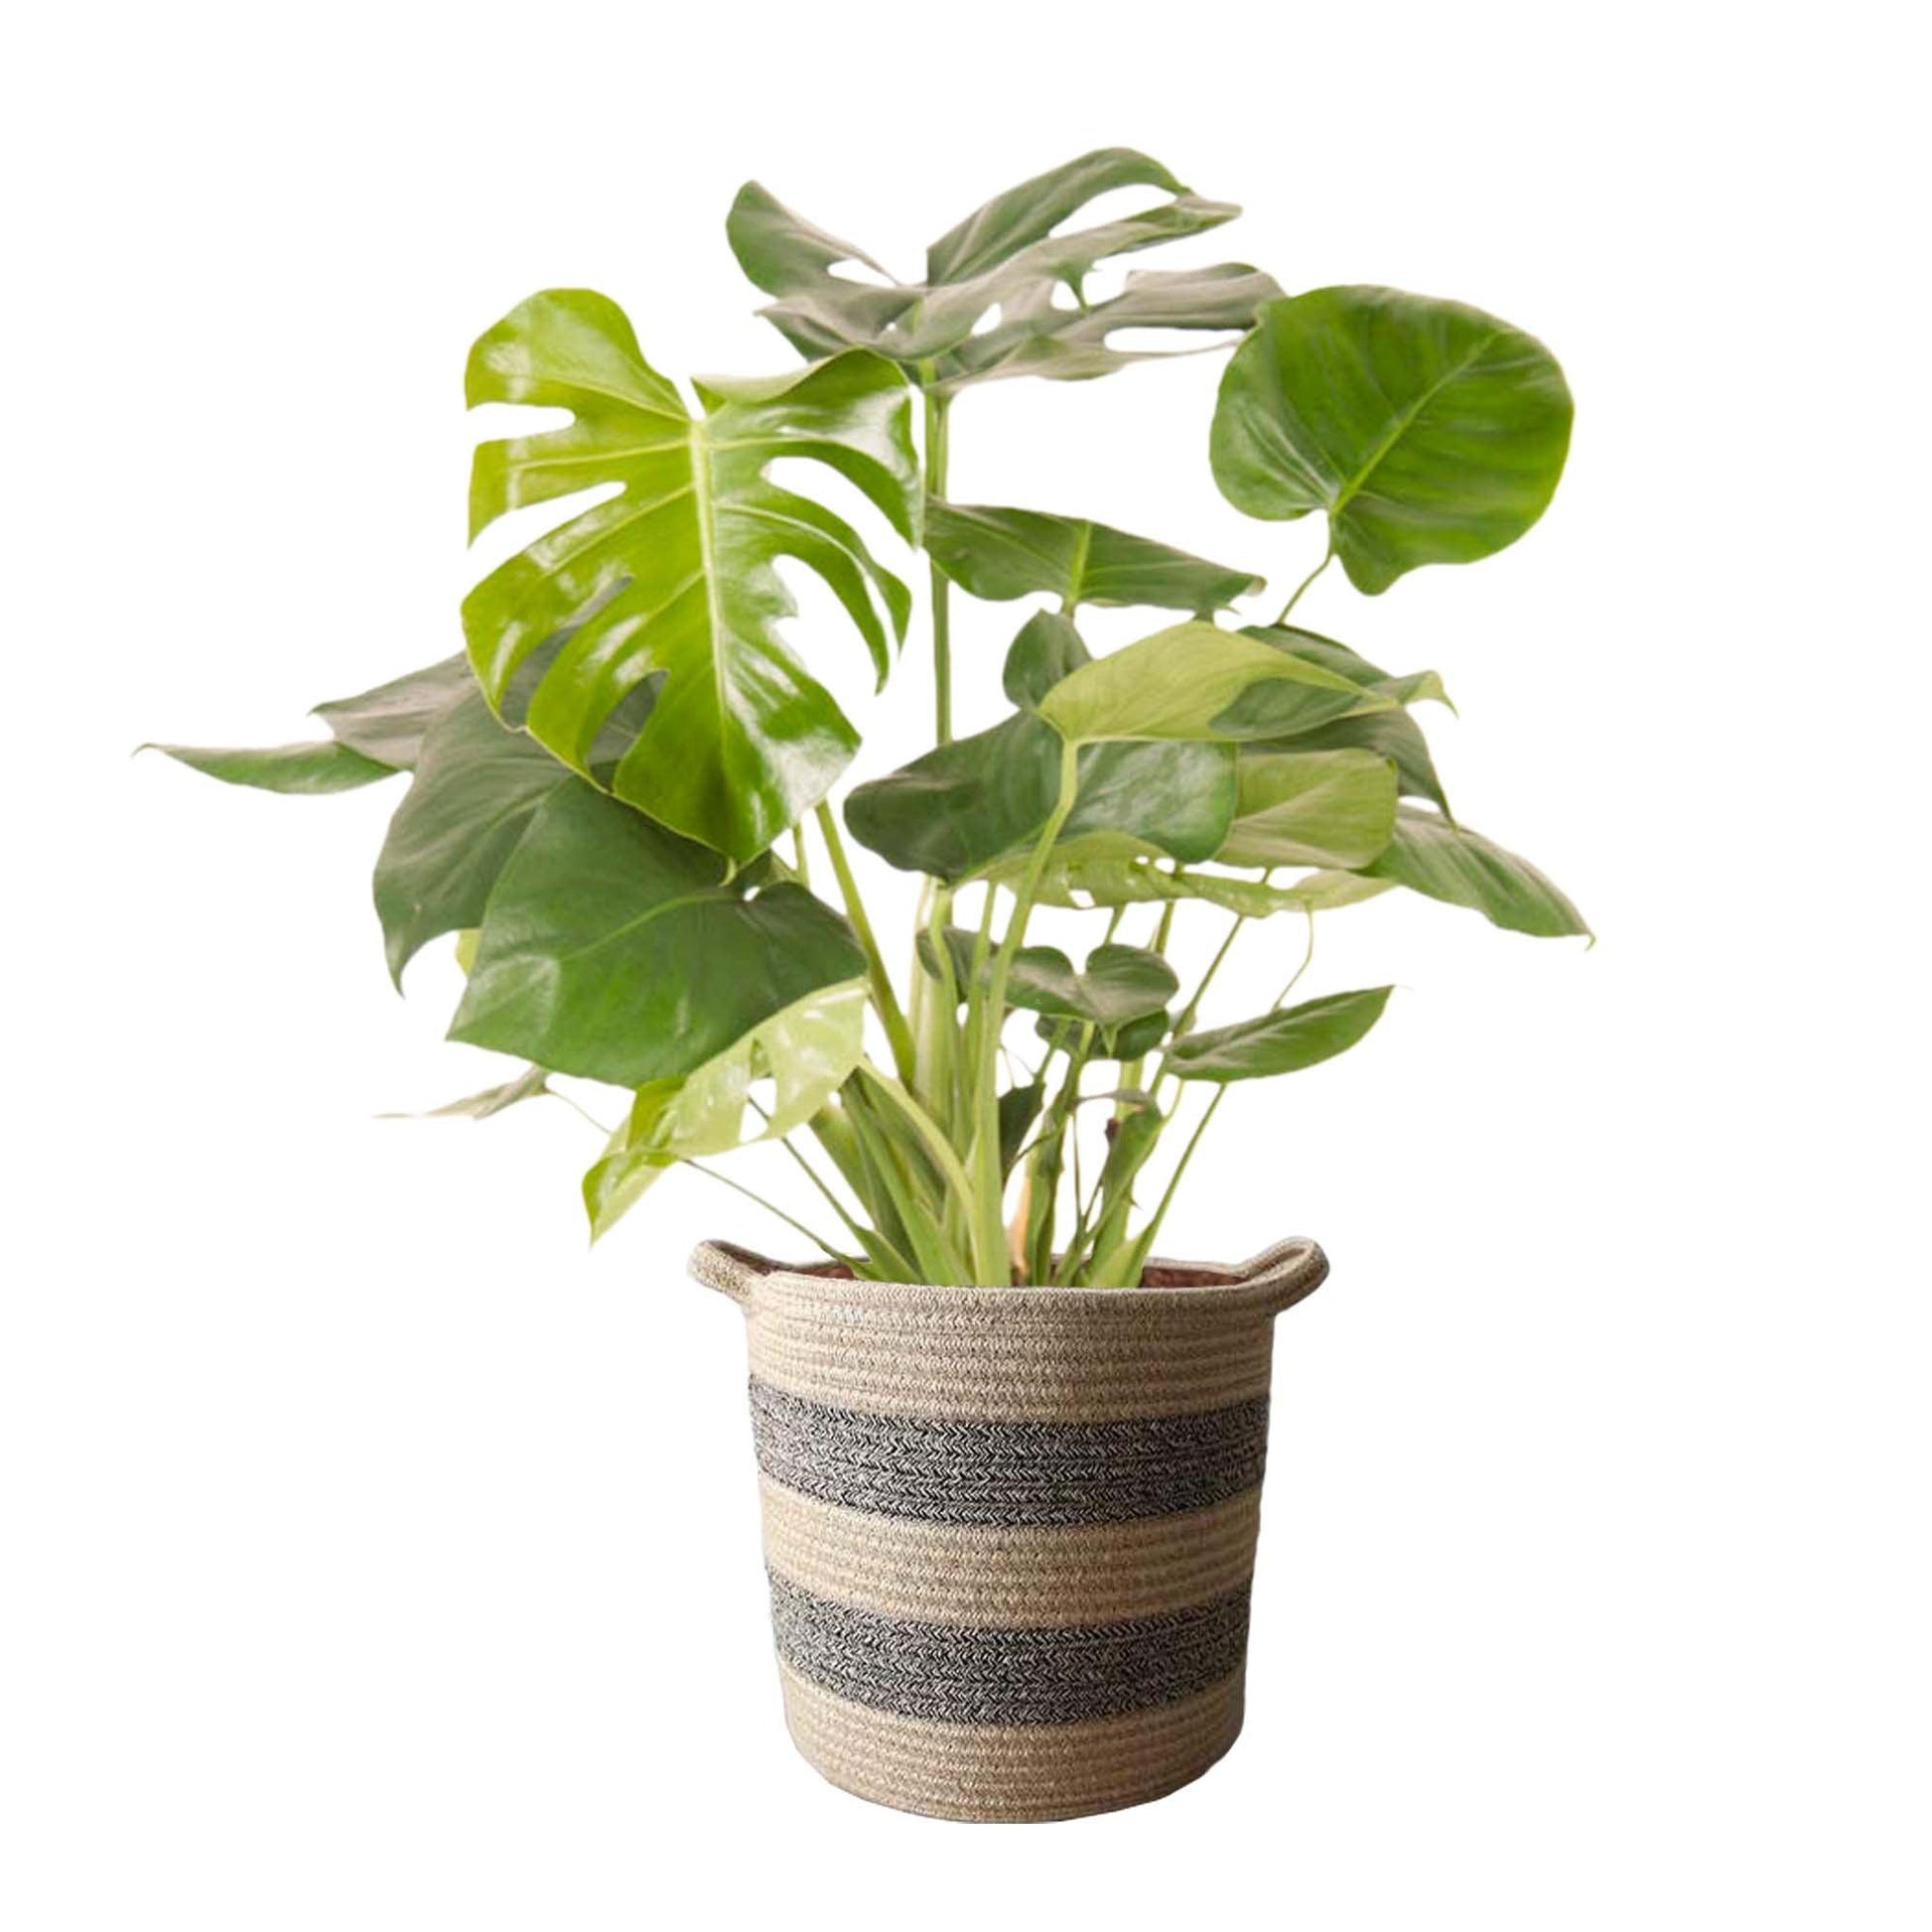 MONSTERA Deliciosa - Daily flowers - Plante - Daily flowers